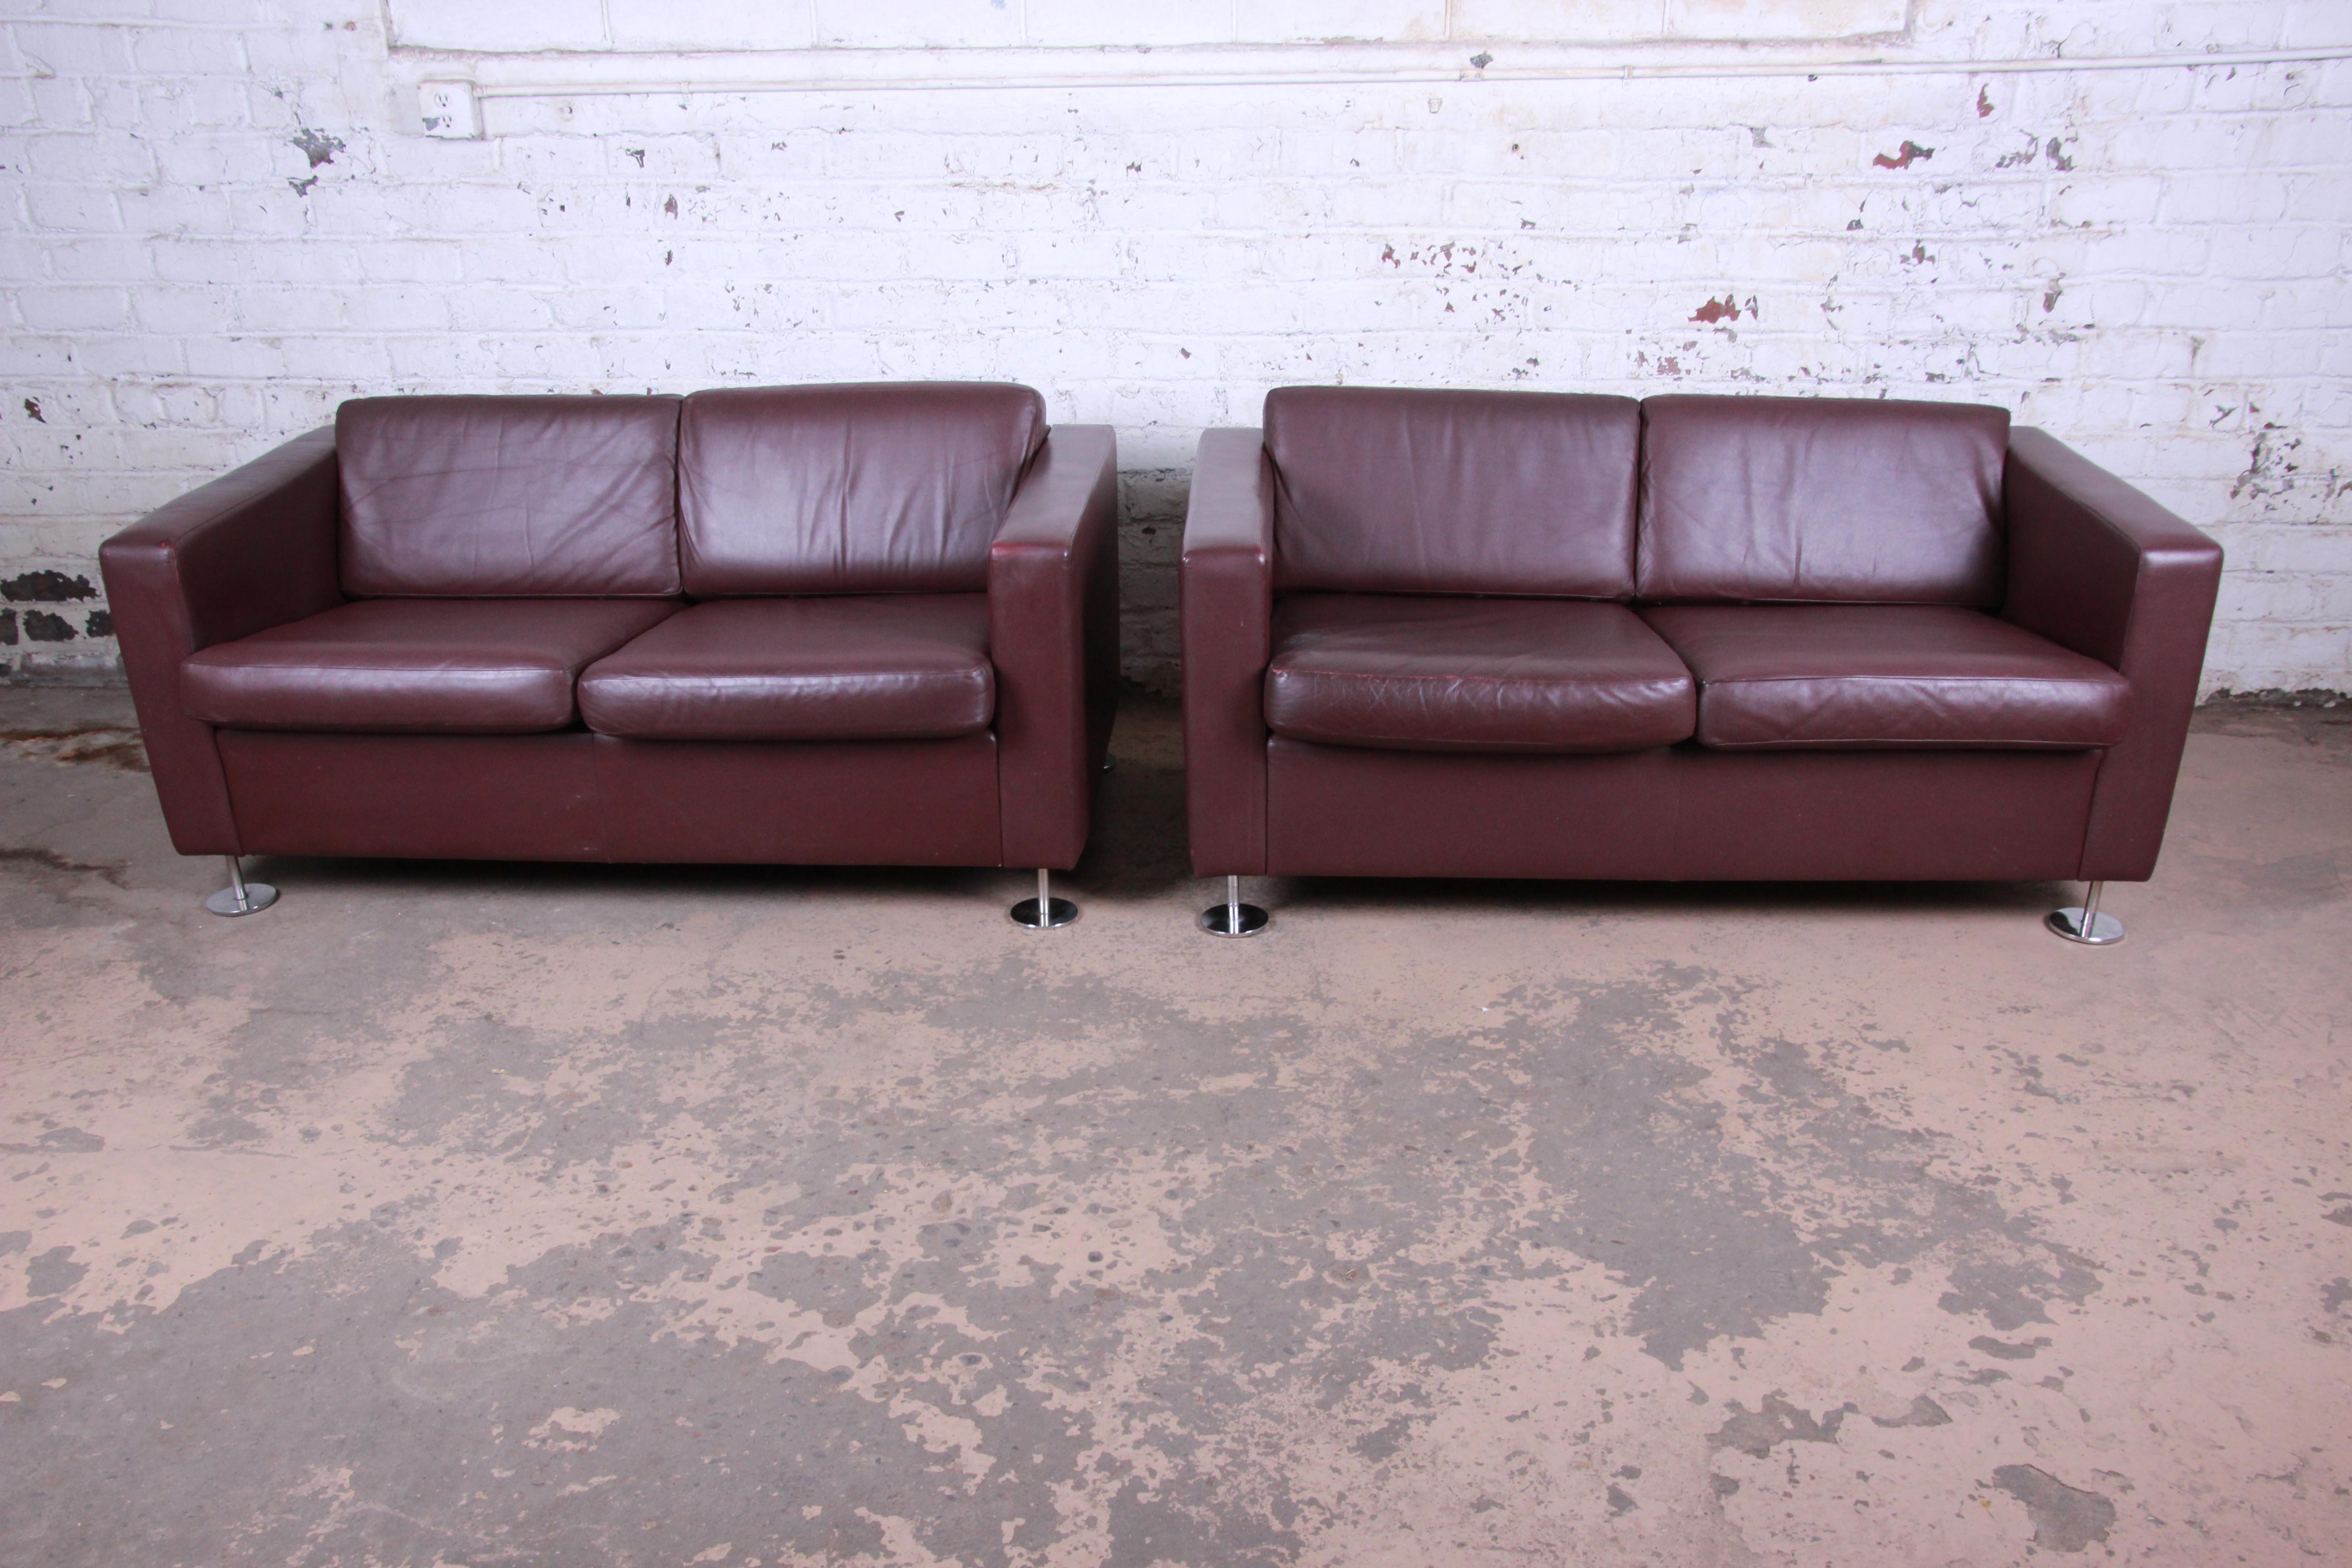 A gorgeous pair of leather tuxedo love seats by Stendig. The sofas feature high grade burgundy leather and chrome feet. The leather has some patina and is nicely worn in from age and use. The seats are still nice and firm. Made in Switzerland by